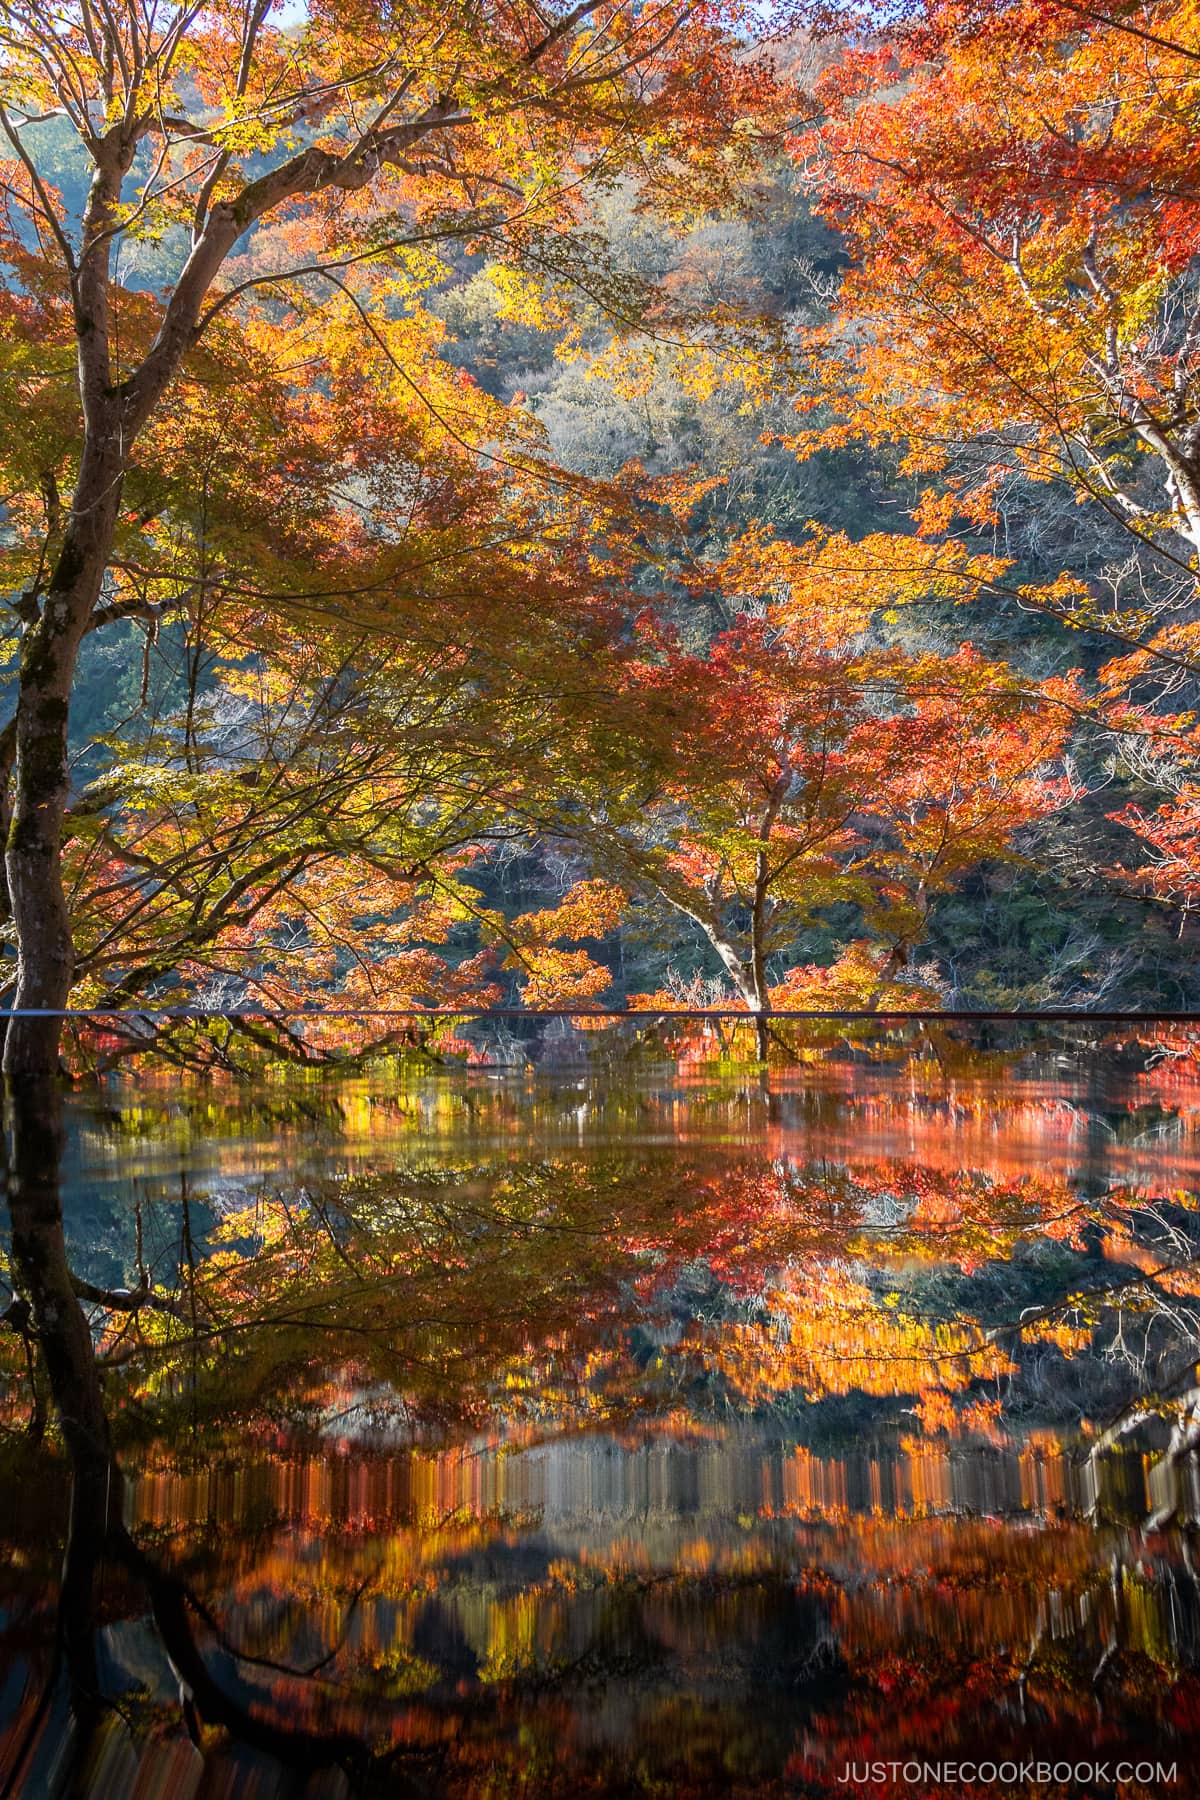 Colorful autumn leaves reflected in a table of water